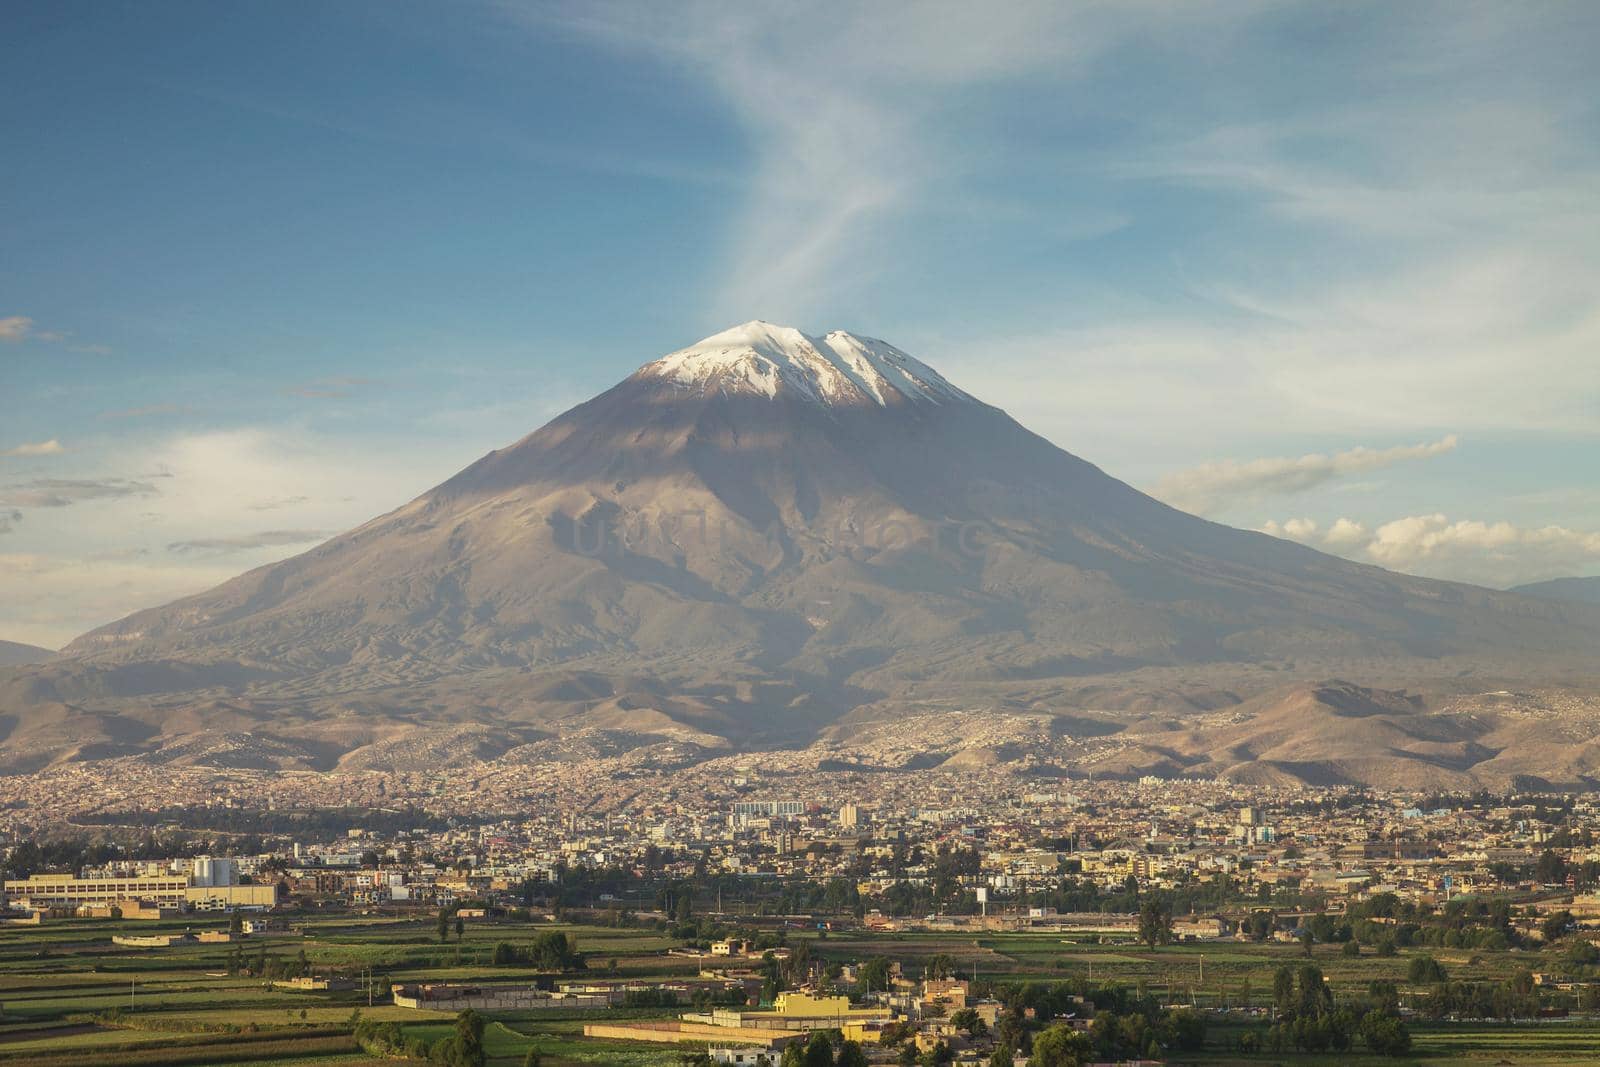 City of Arequipa in Peru with its iconic volcano Misti by wondry